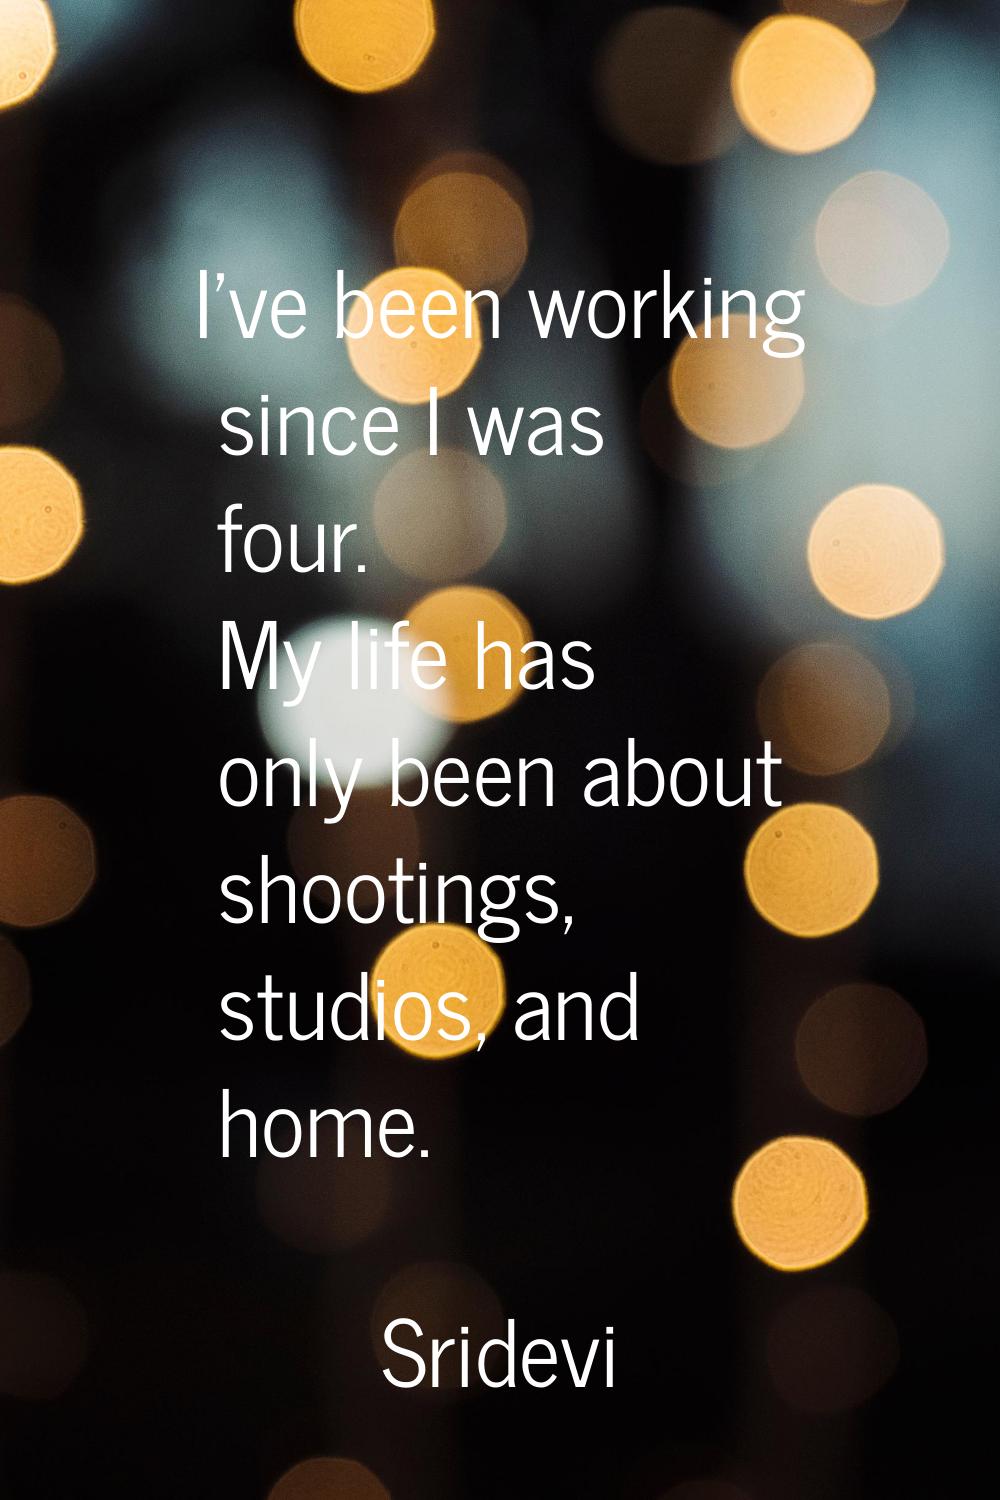 I've been working since I was four. My life has only been about shootings, studios, and home.